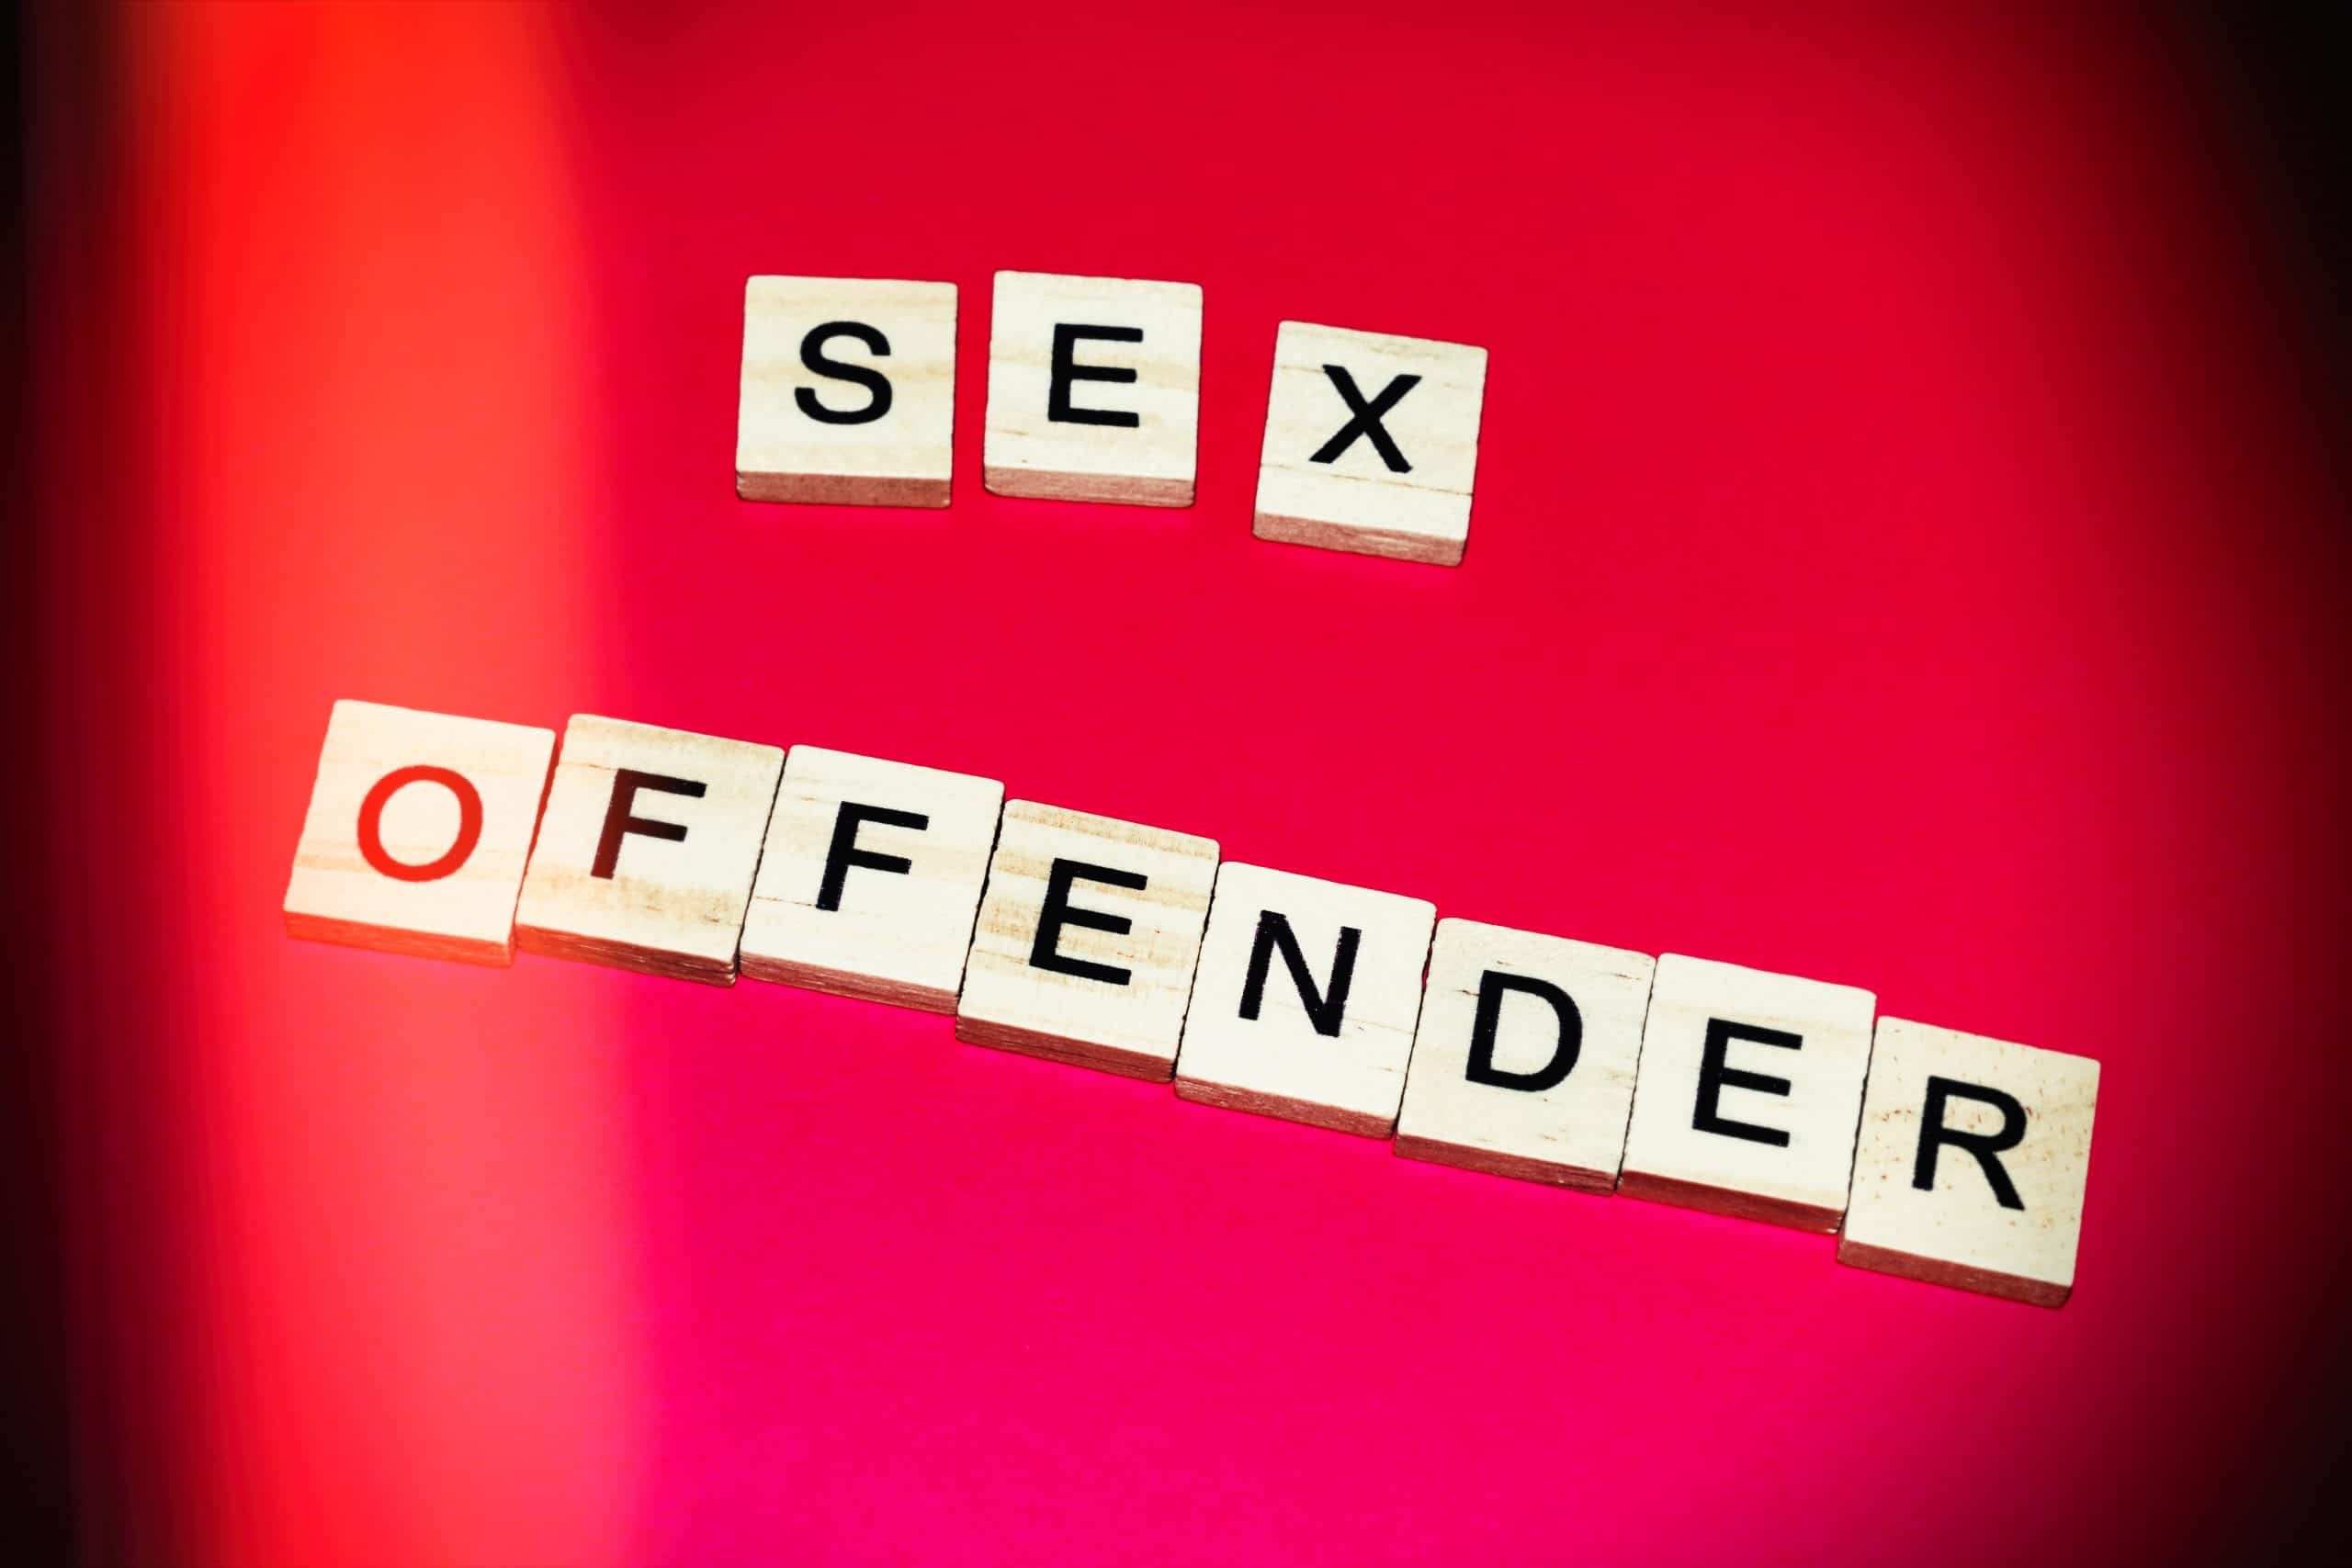 What You Should Know About The Texas Sex Offender Registry Mary Beth Harrell Law Firm